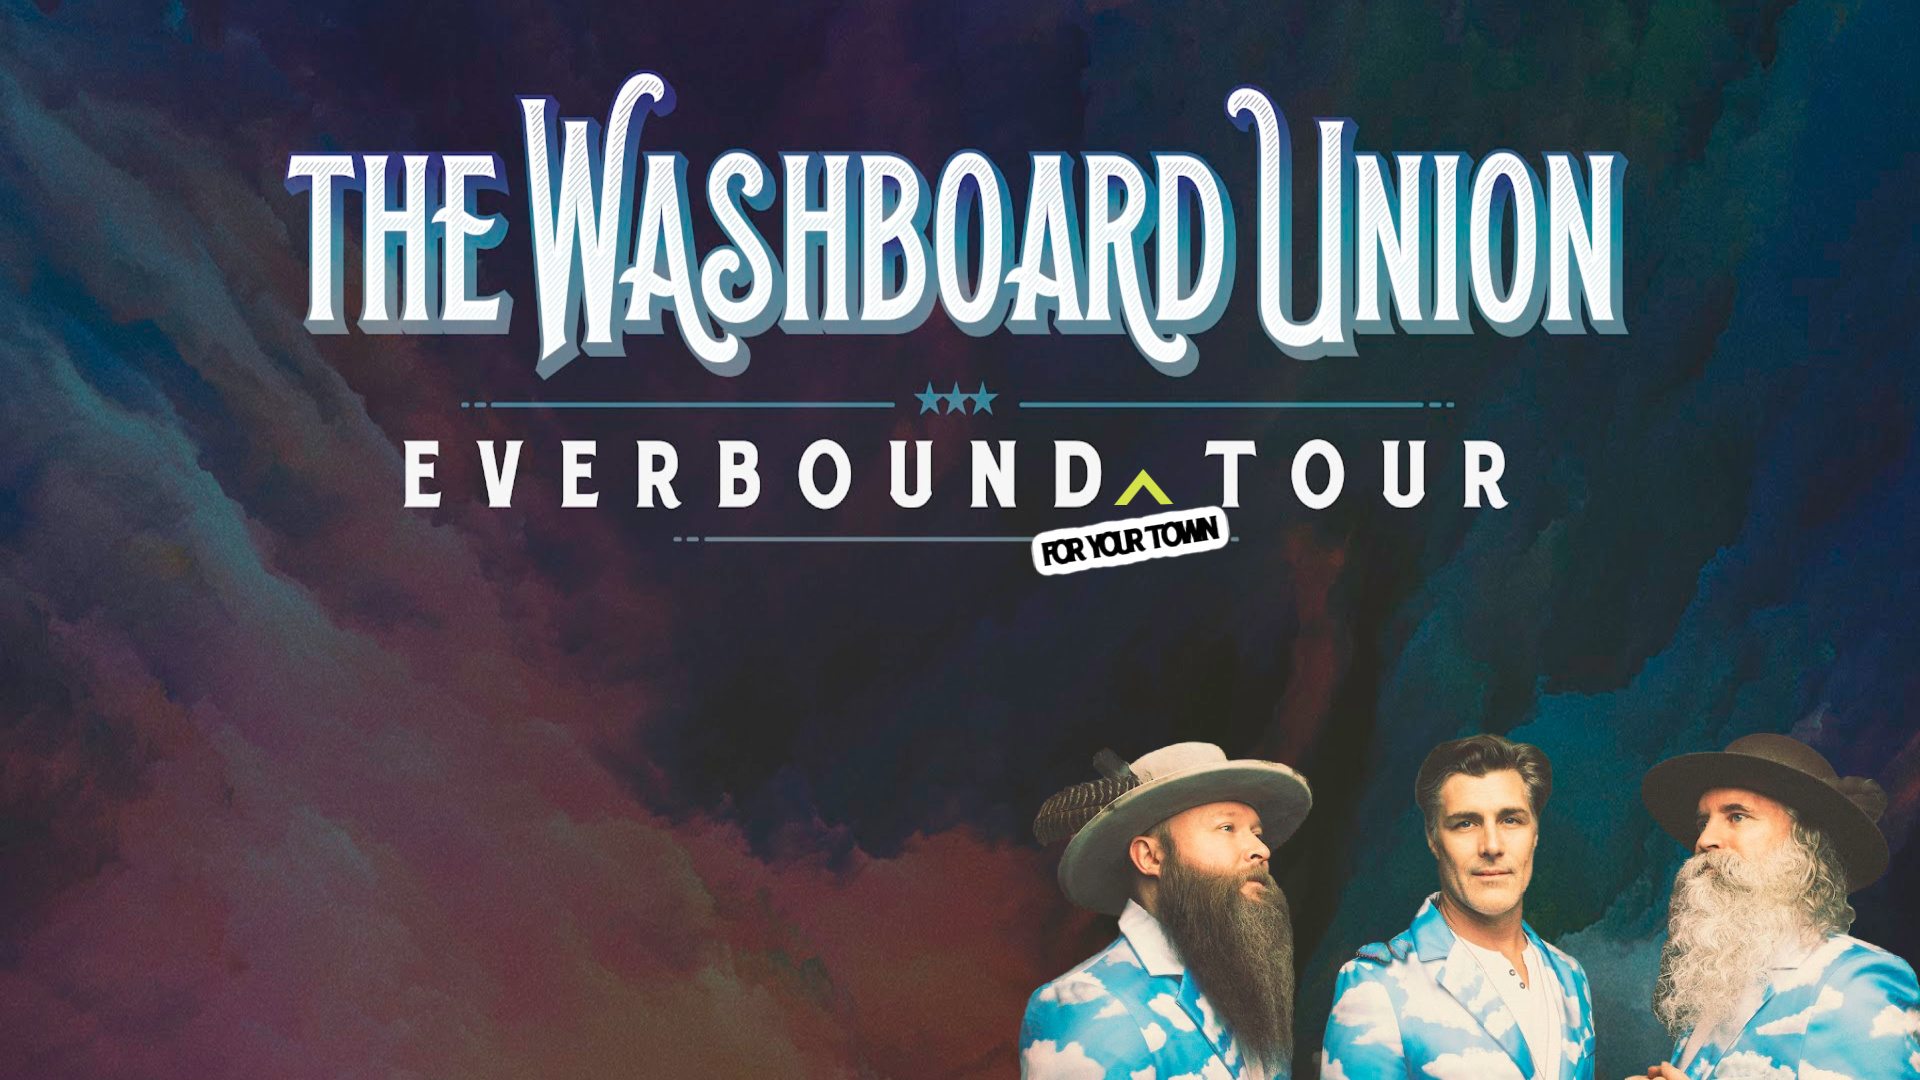 The Washboard Union Everbound For Your Town Tour